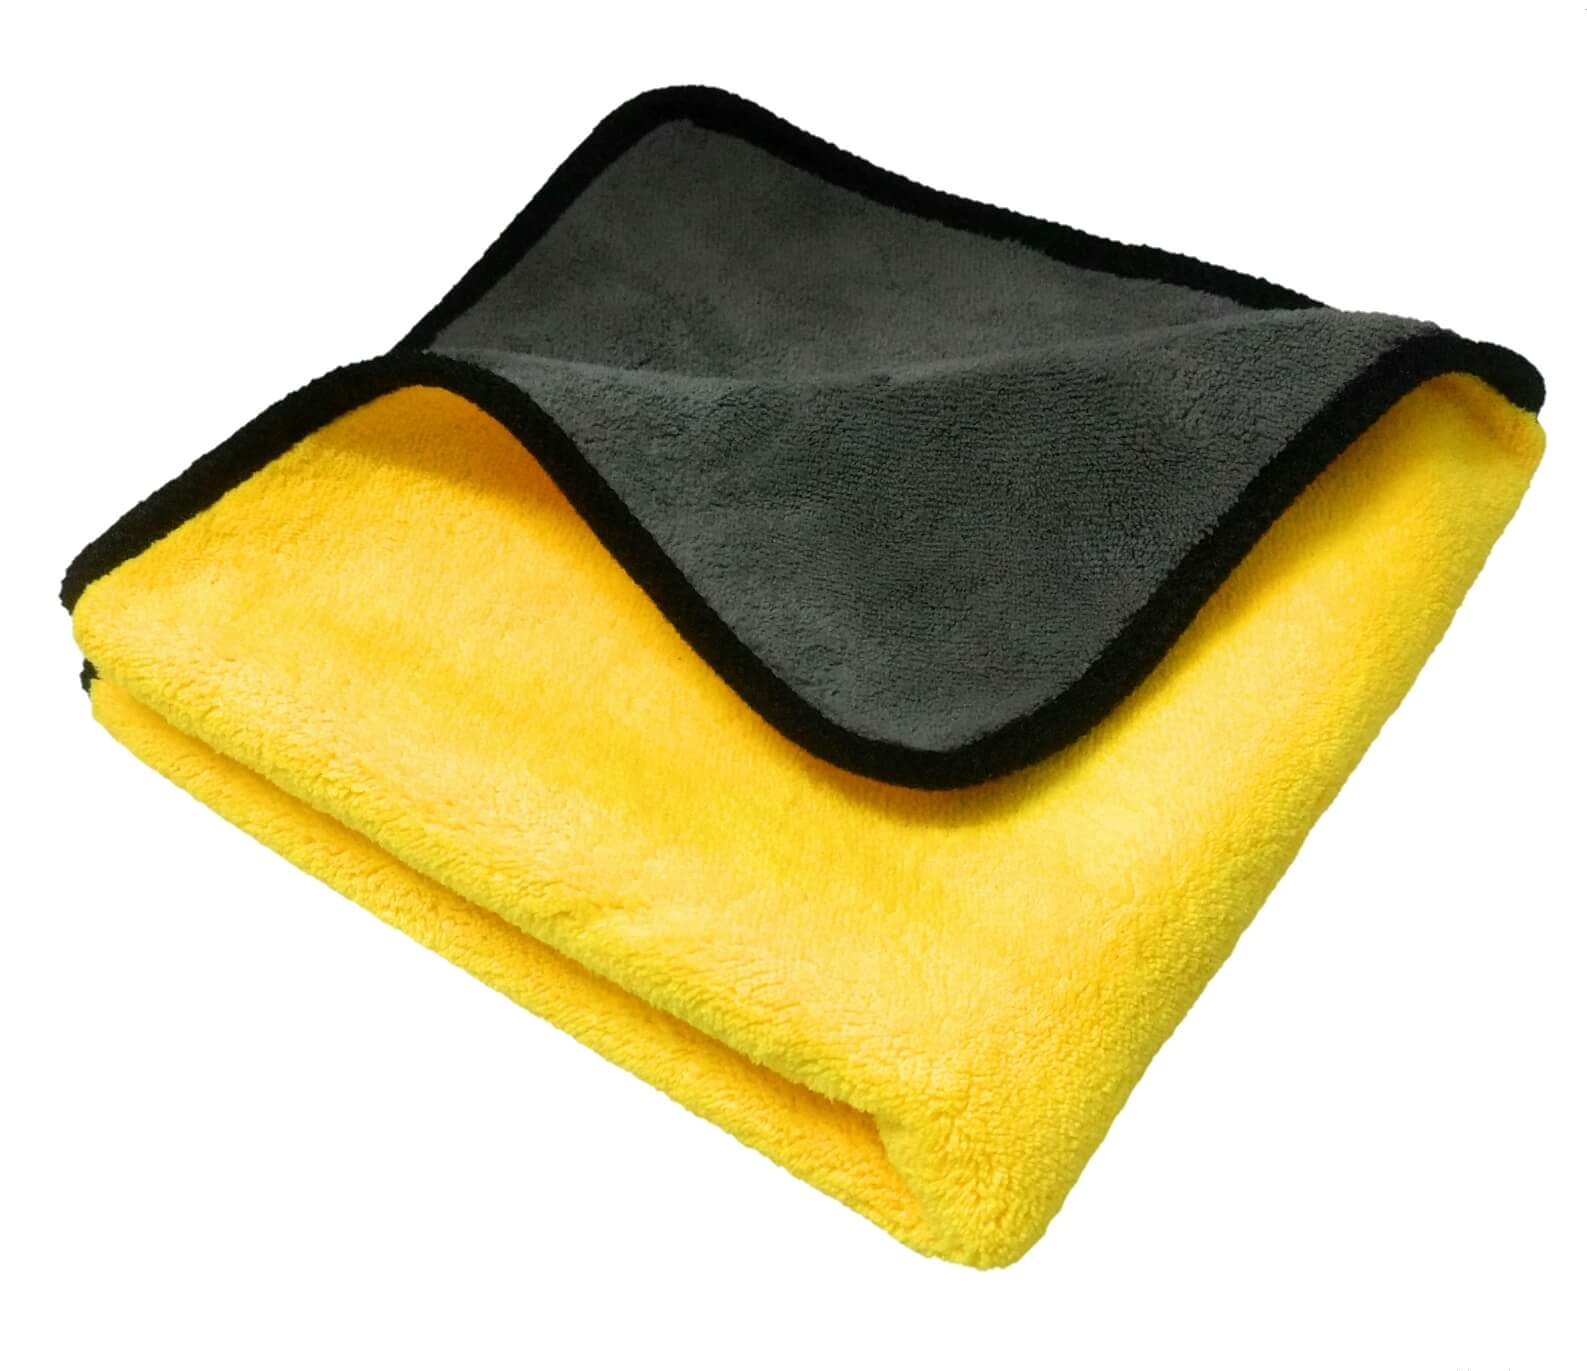 800 GSM Dual sided coral fleece thick & plush microfiber towel -1